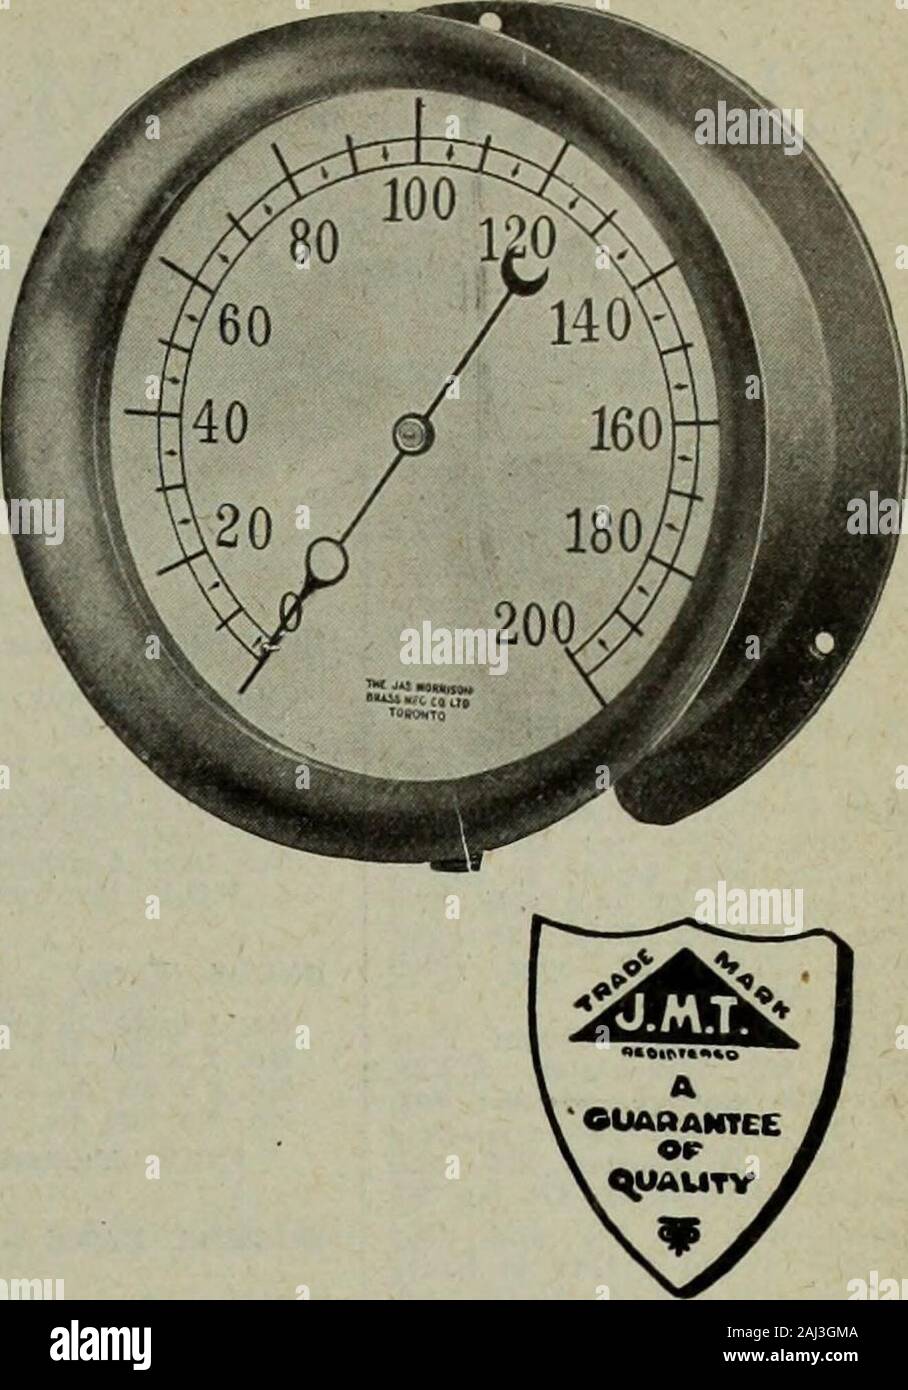 Hardware merchandising September-December 1919 . December 20, 1919 HARDWARE AND METAL—Advertising Section 101 Morrison Gauges comprise a line that covers every require-ment. You always have the right goods toclose a sale with Morrison Products. They include gauges for every conceivablepurpose—for indicating, or indicating andrecording—pressure, temperature, altitude,revolutions, etc. The trade find them good sellers and mechani-cal men everywhere look upon them as astandard. The Morrison name helps your business and thesalability of Morrison Products helps yourpocket-book. A full guarantee of Stock Photo